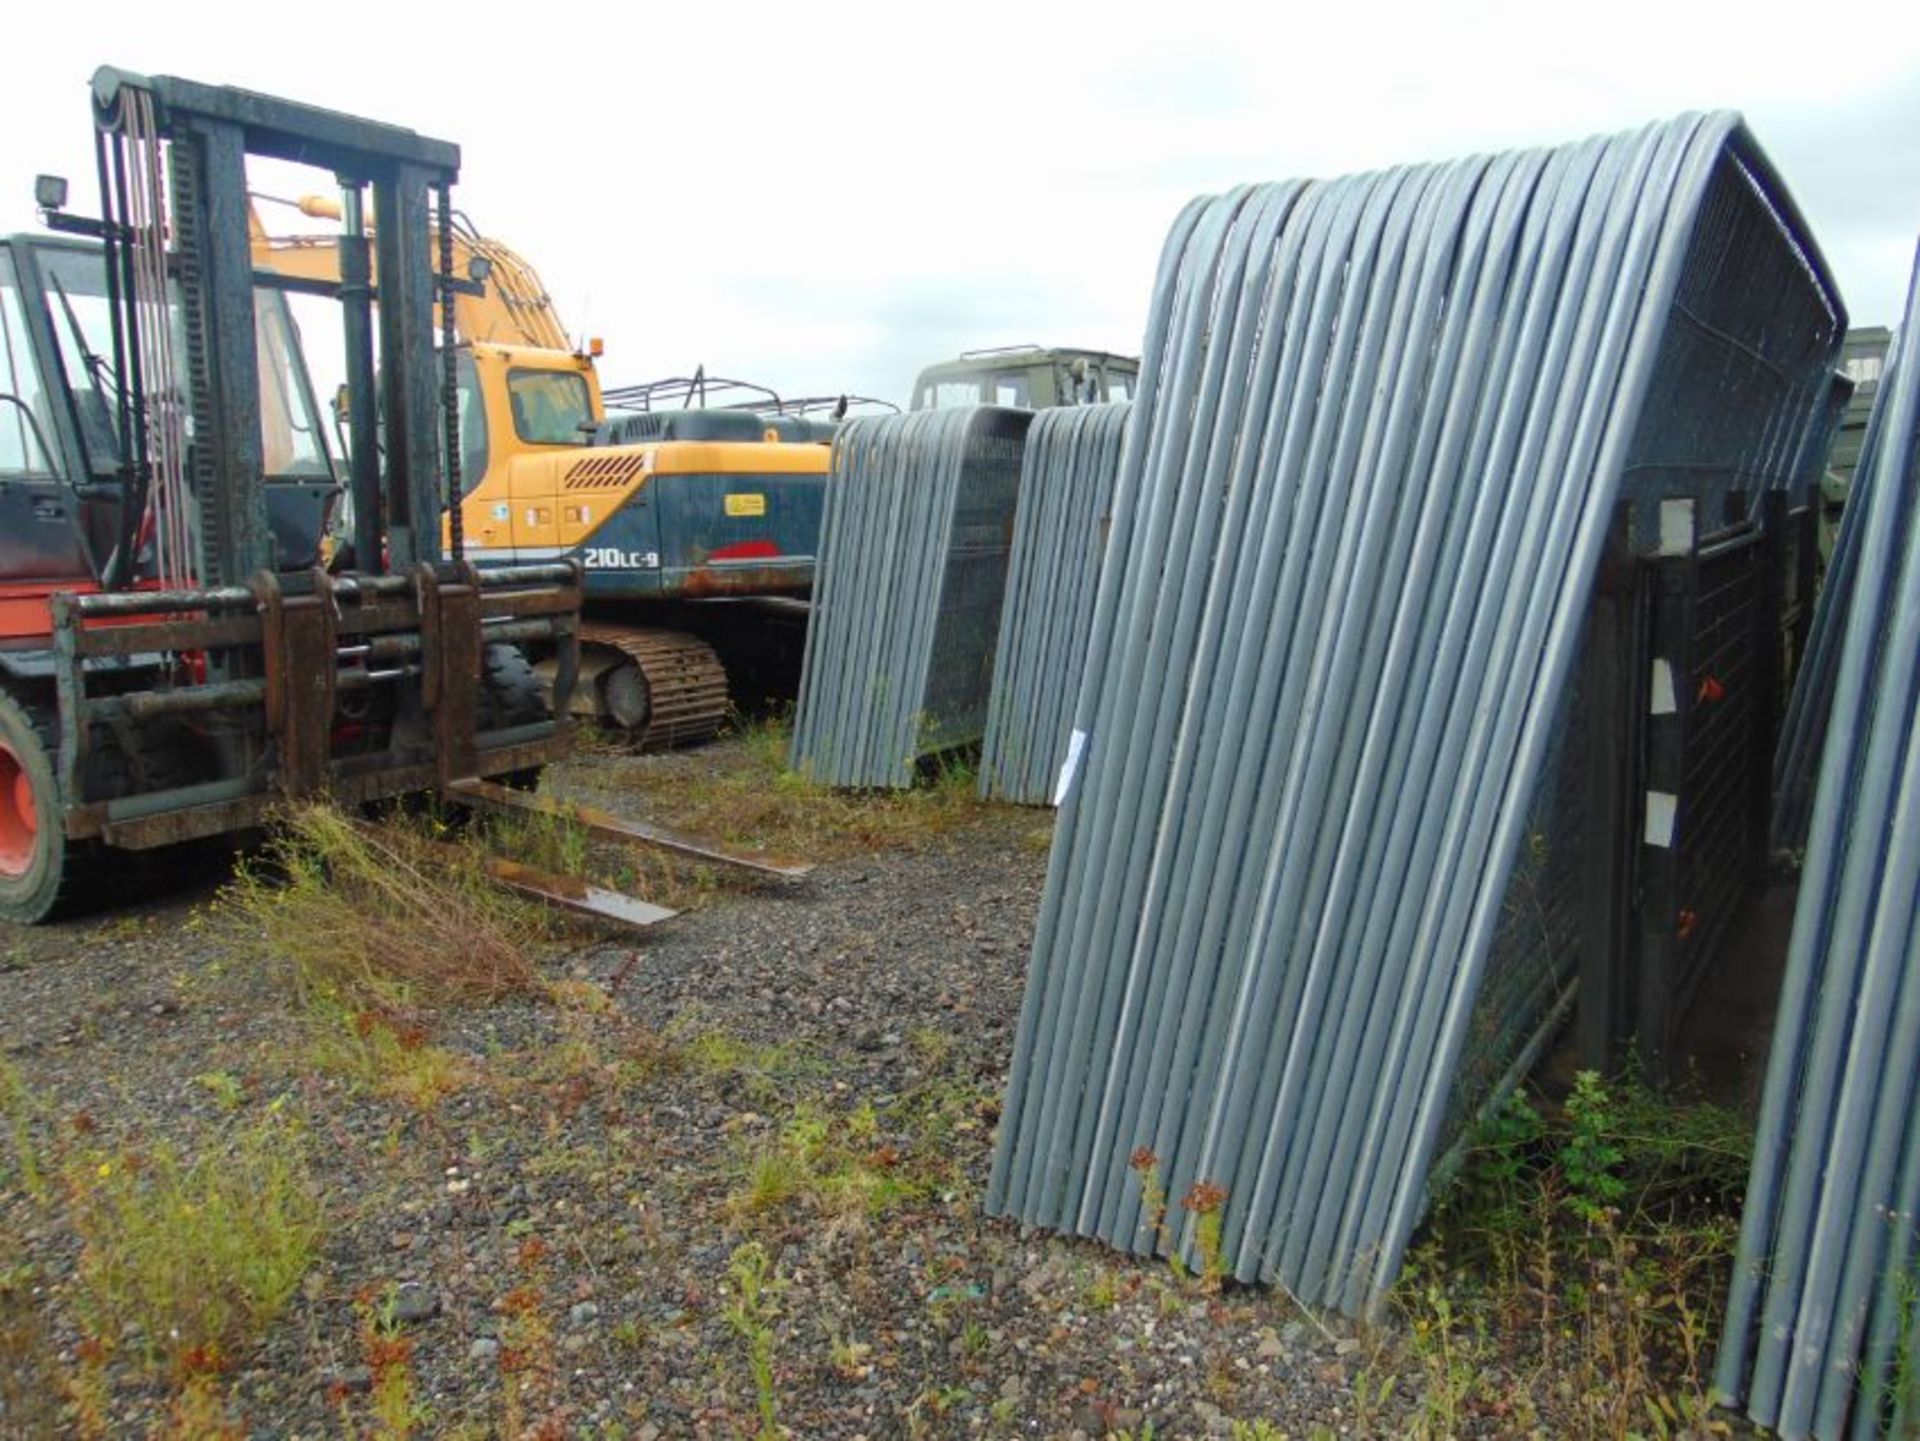 20 x New unissued Heras Style Fencing Panels 3.5m x 2m galvanized c/w with feet - Image 2 of 4